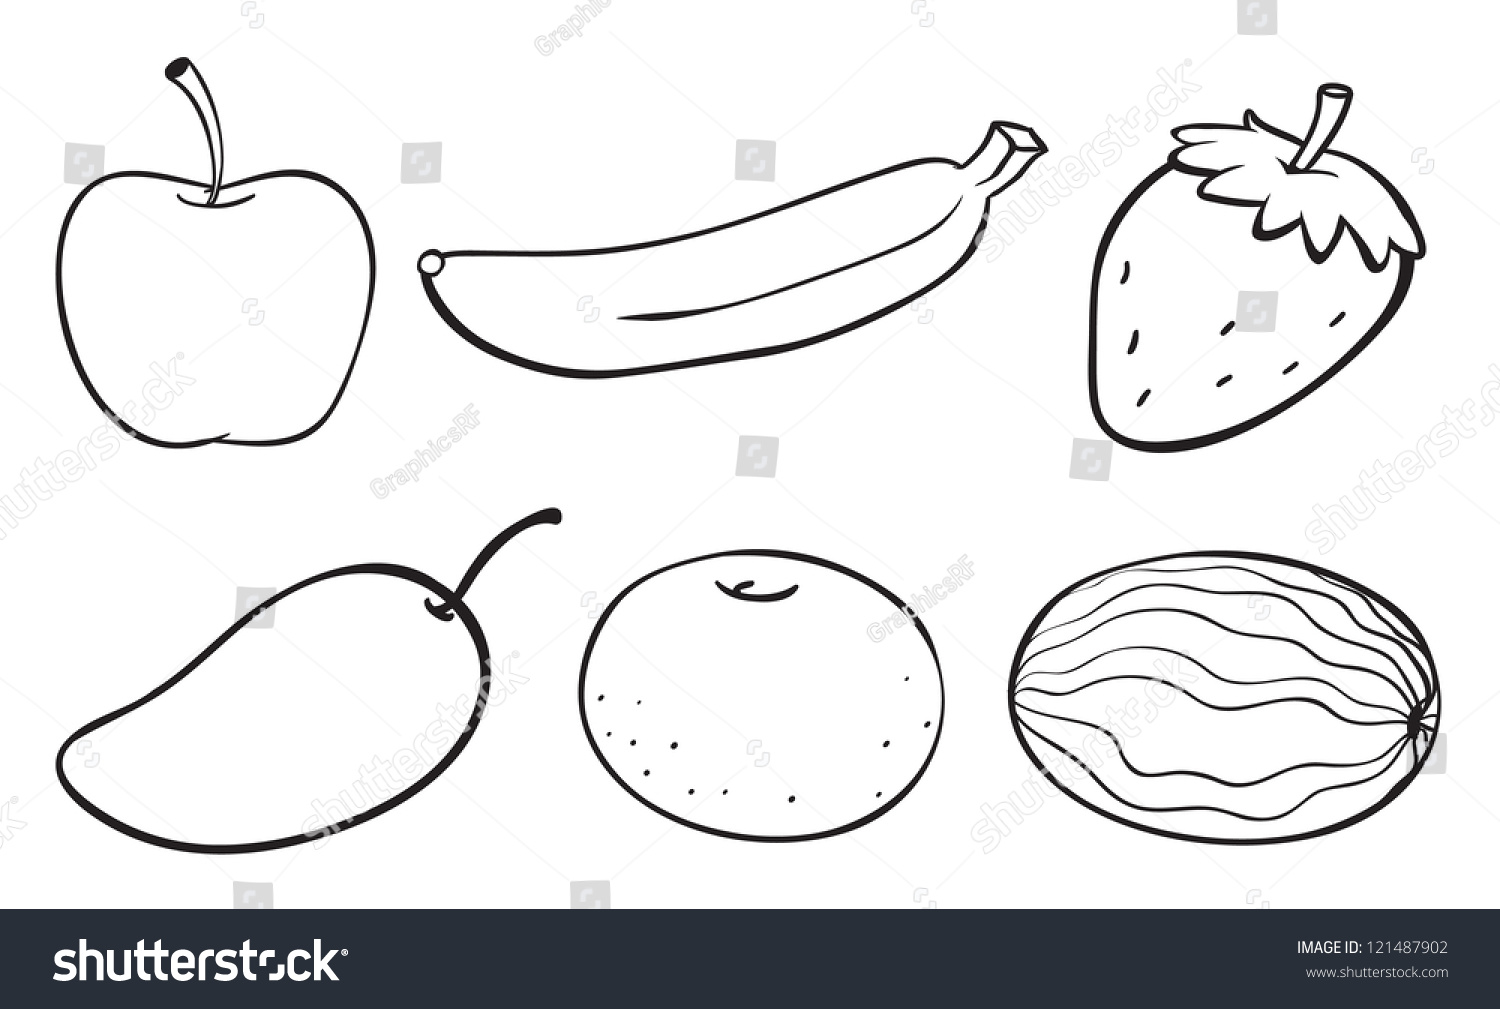 Illustration Of A Sketch Of Various Fruits On A White Background